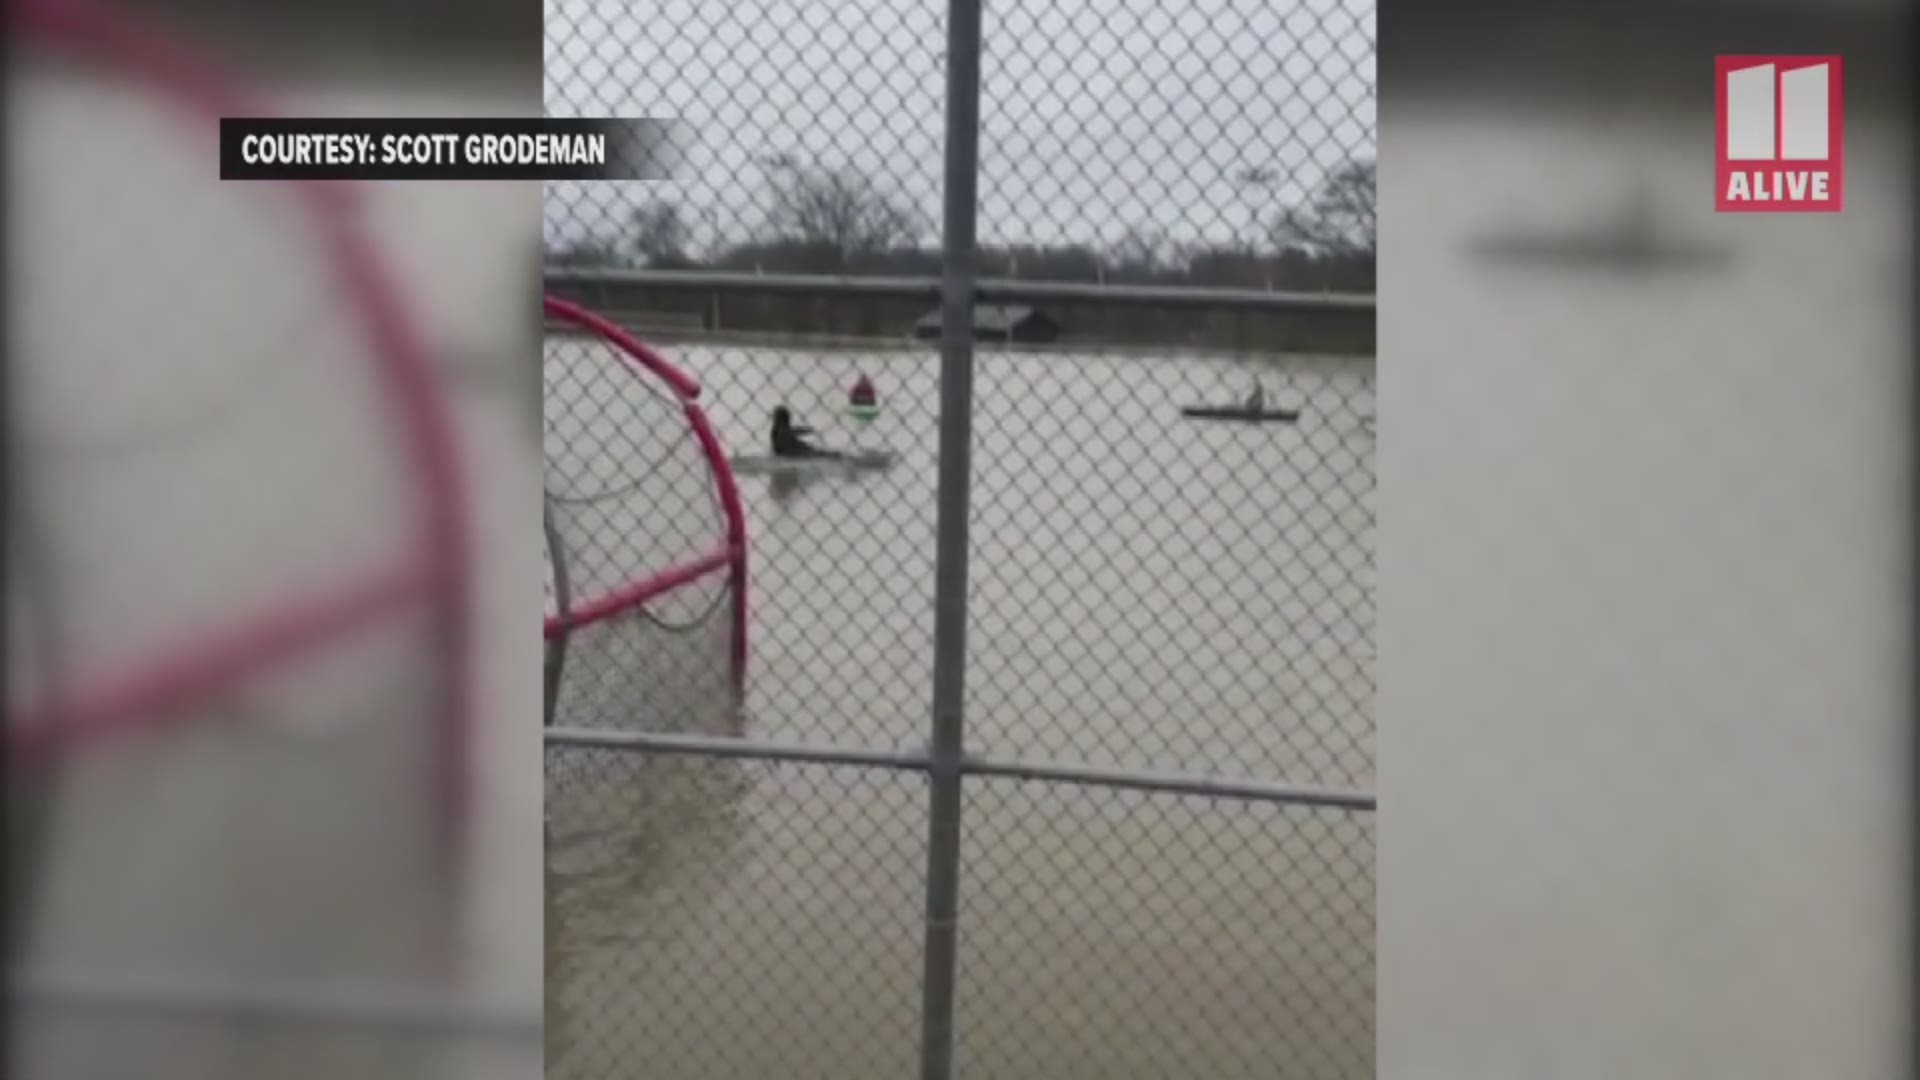 They didn't let a little - actually a lot - of rain stop them from practicing. What was your excuse! (Video by Scott Grodeman)